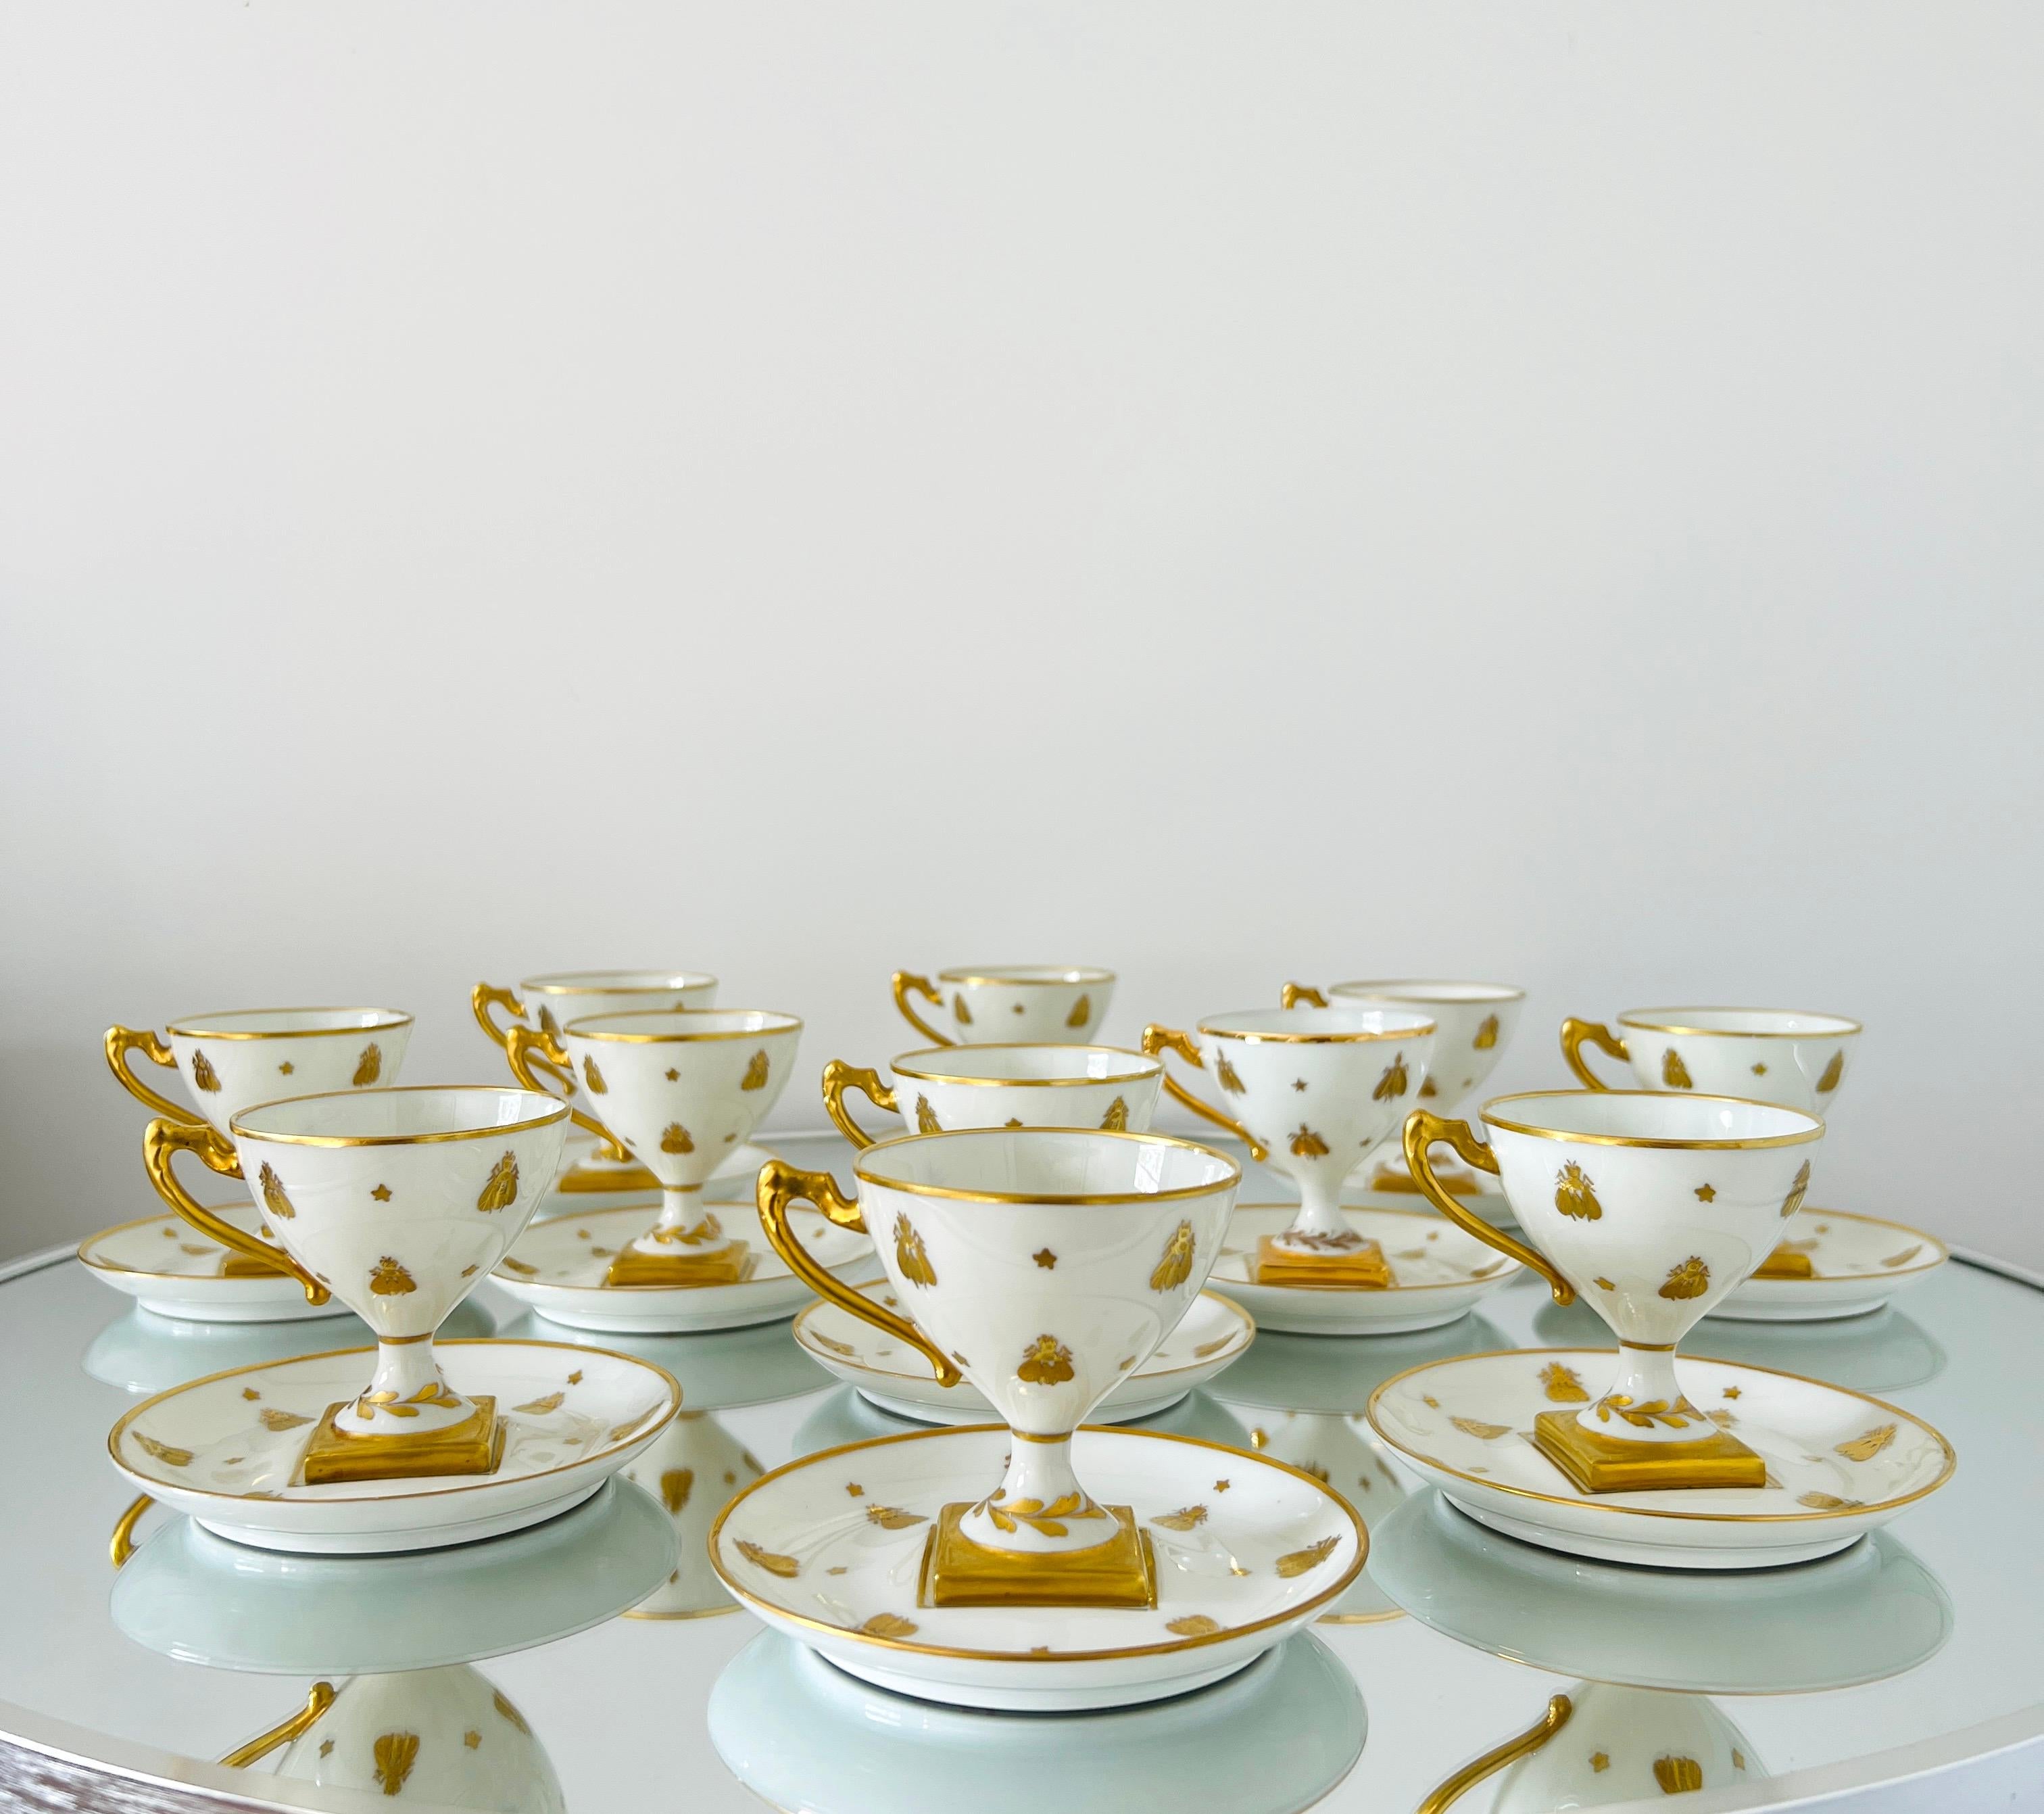 Exquisite neoclassical demitasse set comprised of fine porcelain and 24K gold by Camille Le Tallec. The pattern is from the Abeilles Collection featuring Napoleonic golden bees hand painted in gold over white porcelain. The set includes 11 cups and